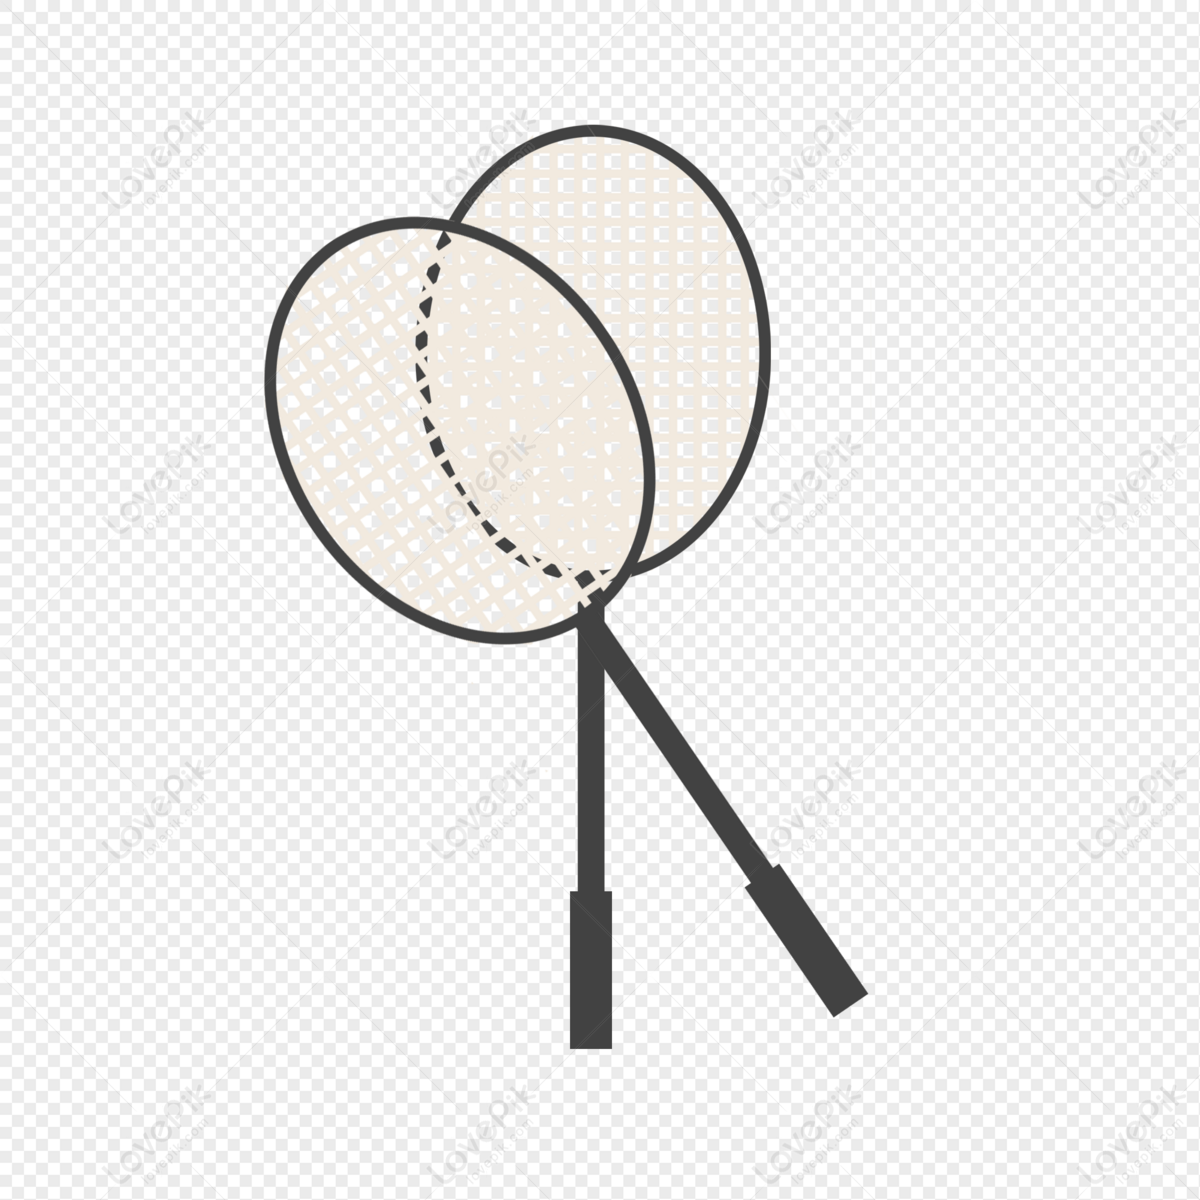 How to Draw a Badminton Racket and Shuttlecock - YouTube